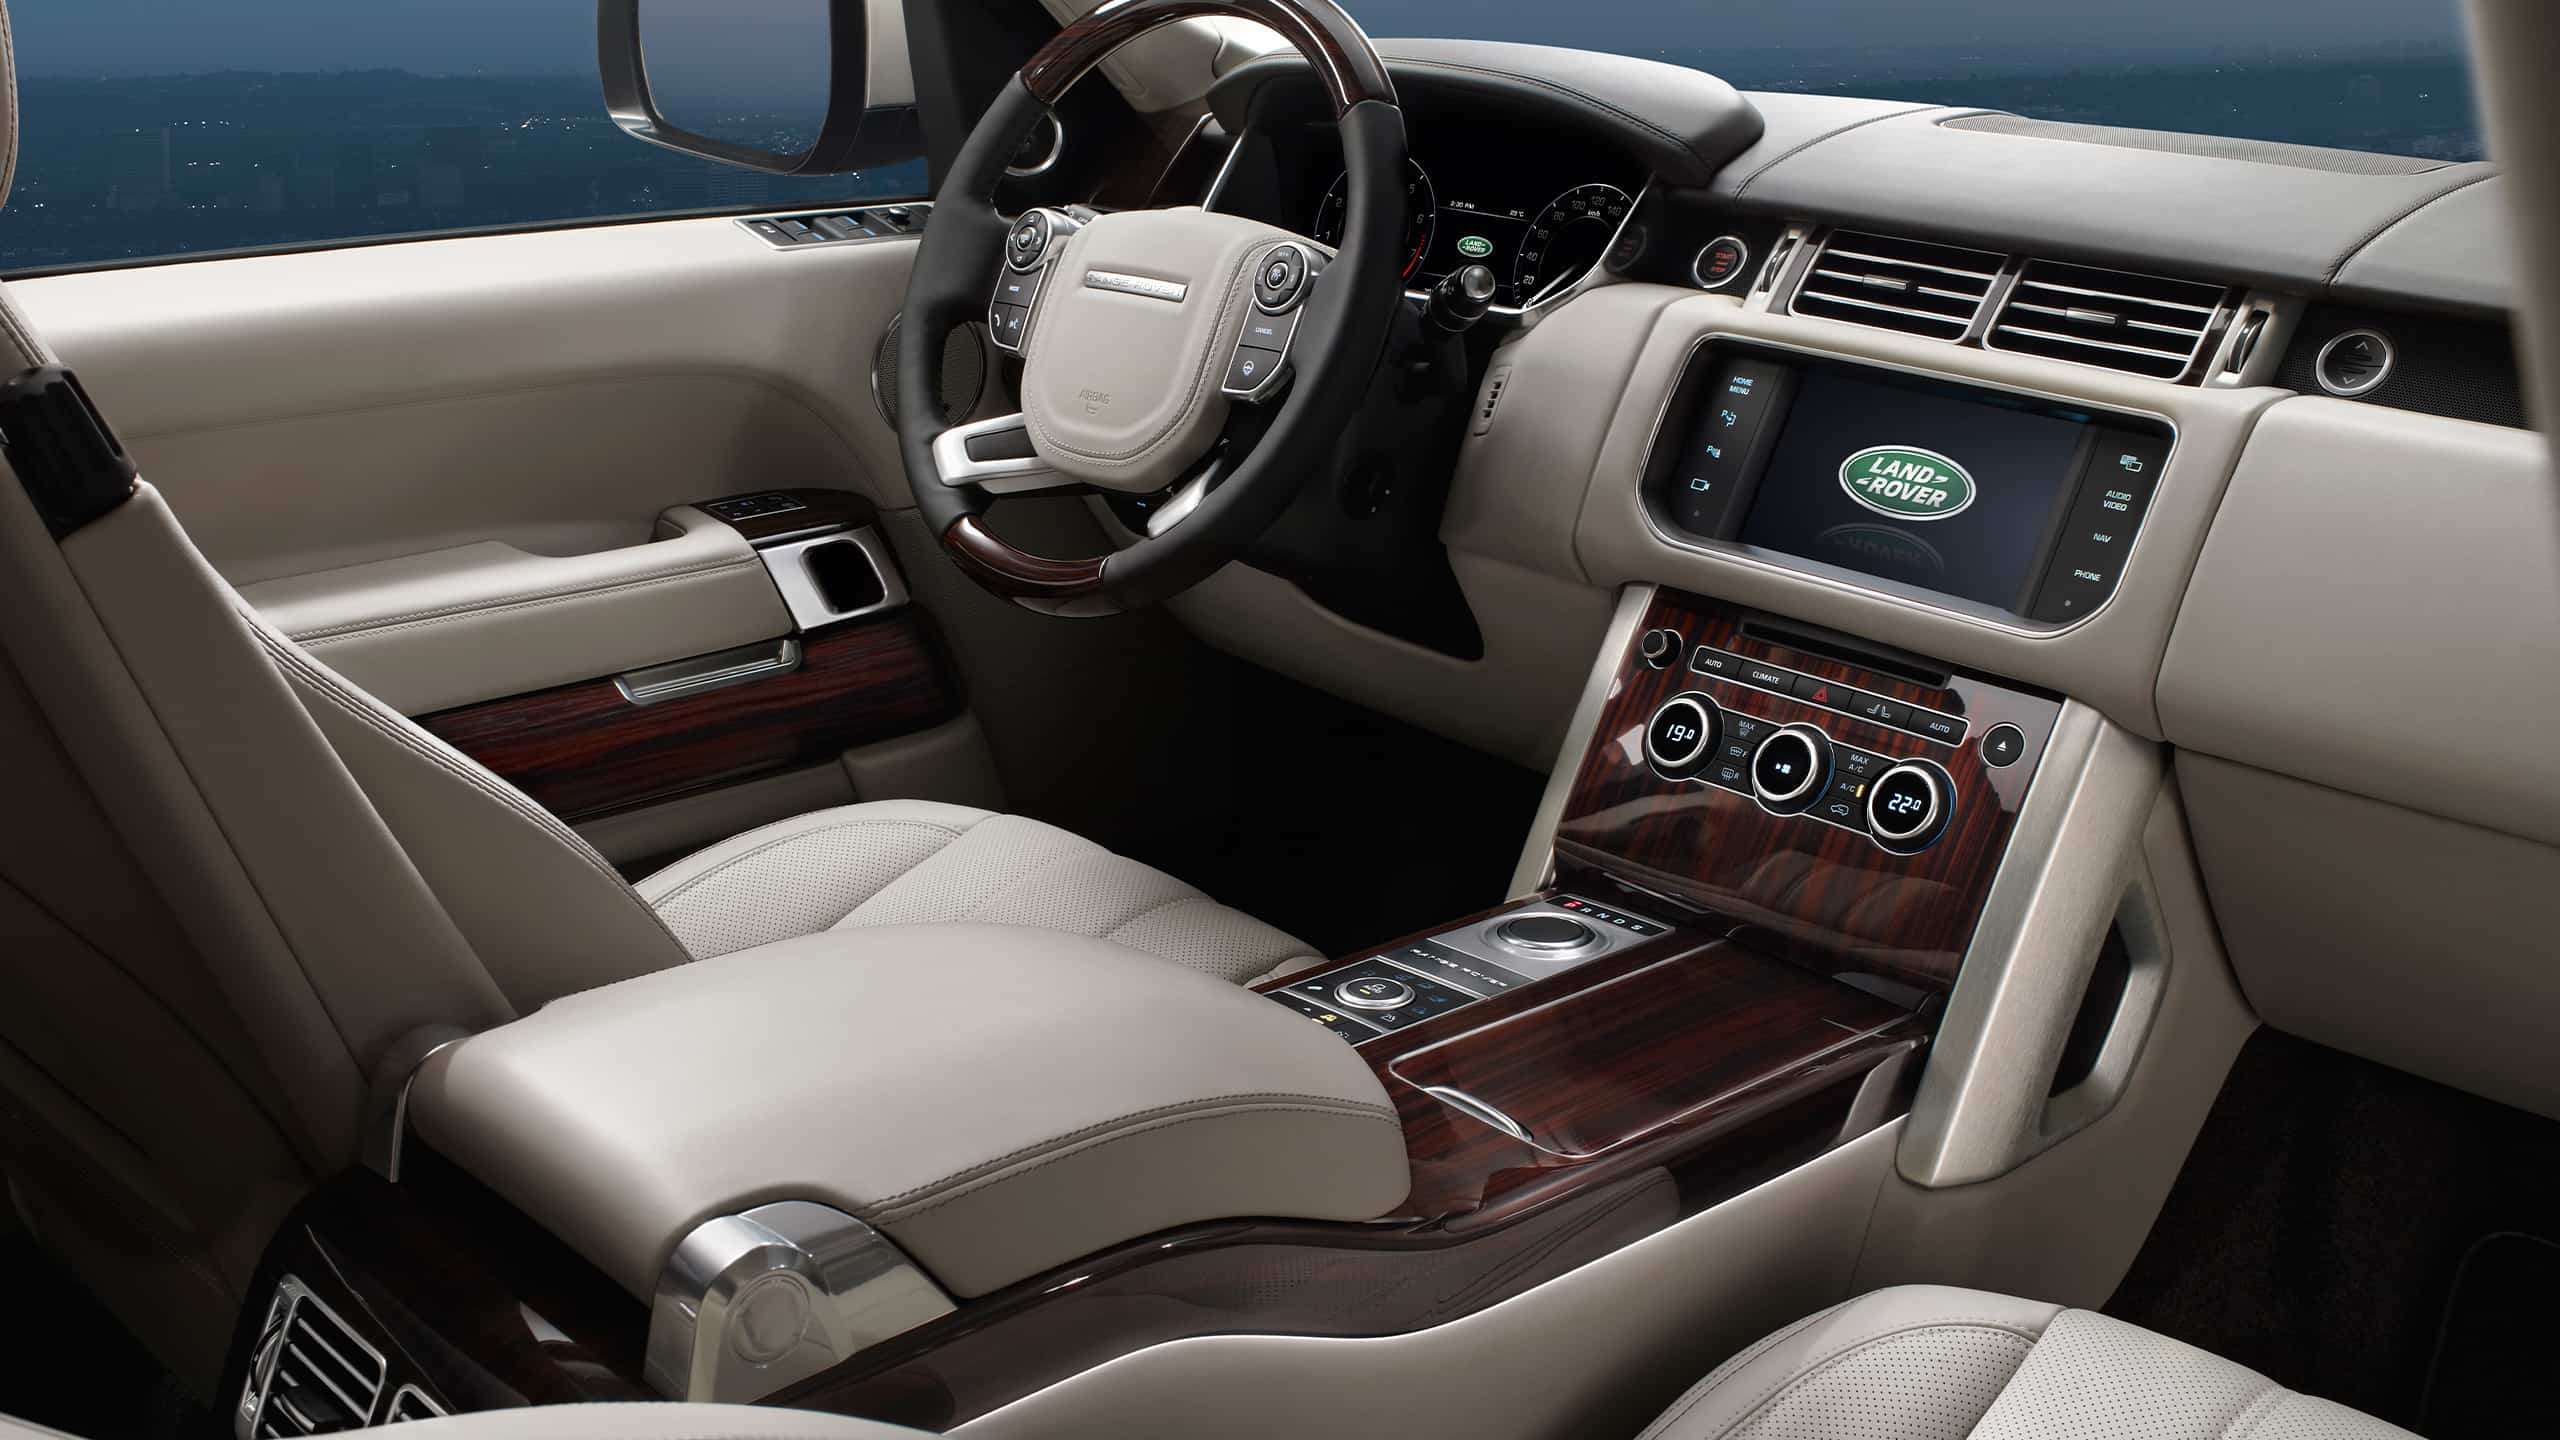 Infotainment System Features of the modern luxury car